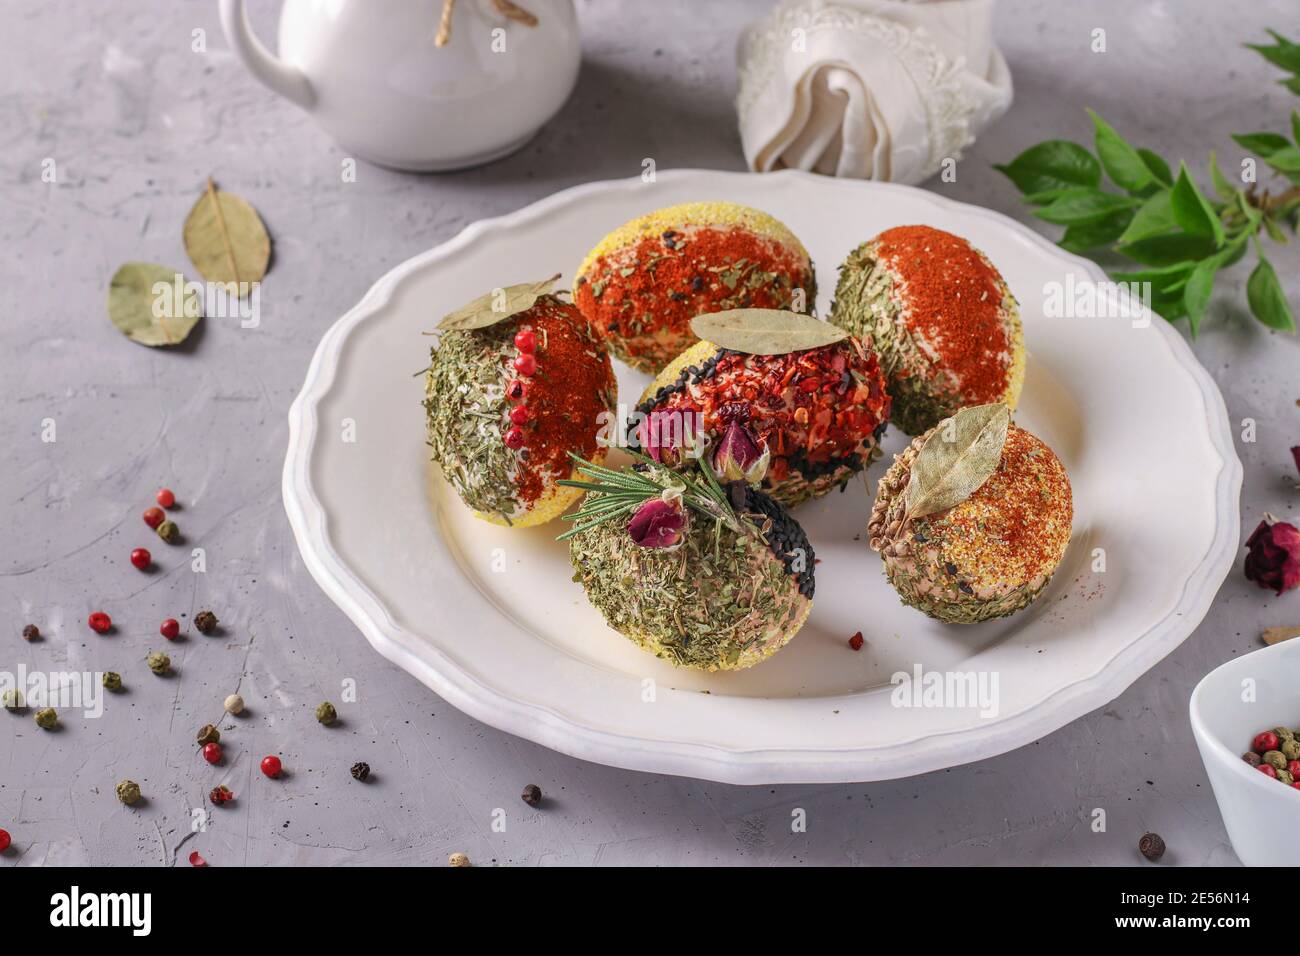 Easter eggs decorated with different spices and cereals without dyes and preservatives on a white plate on a gray concrete background. Stock Photo